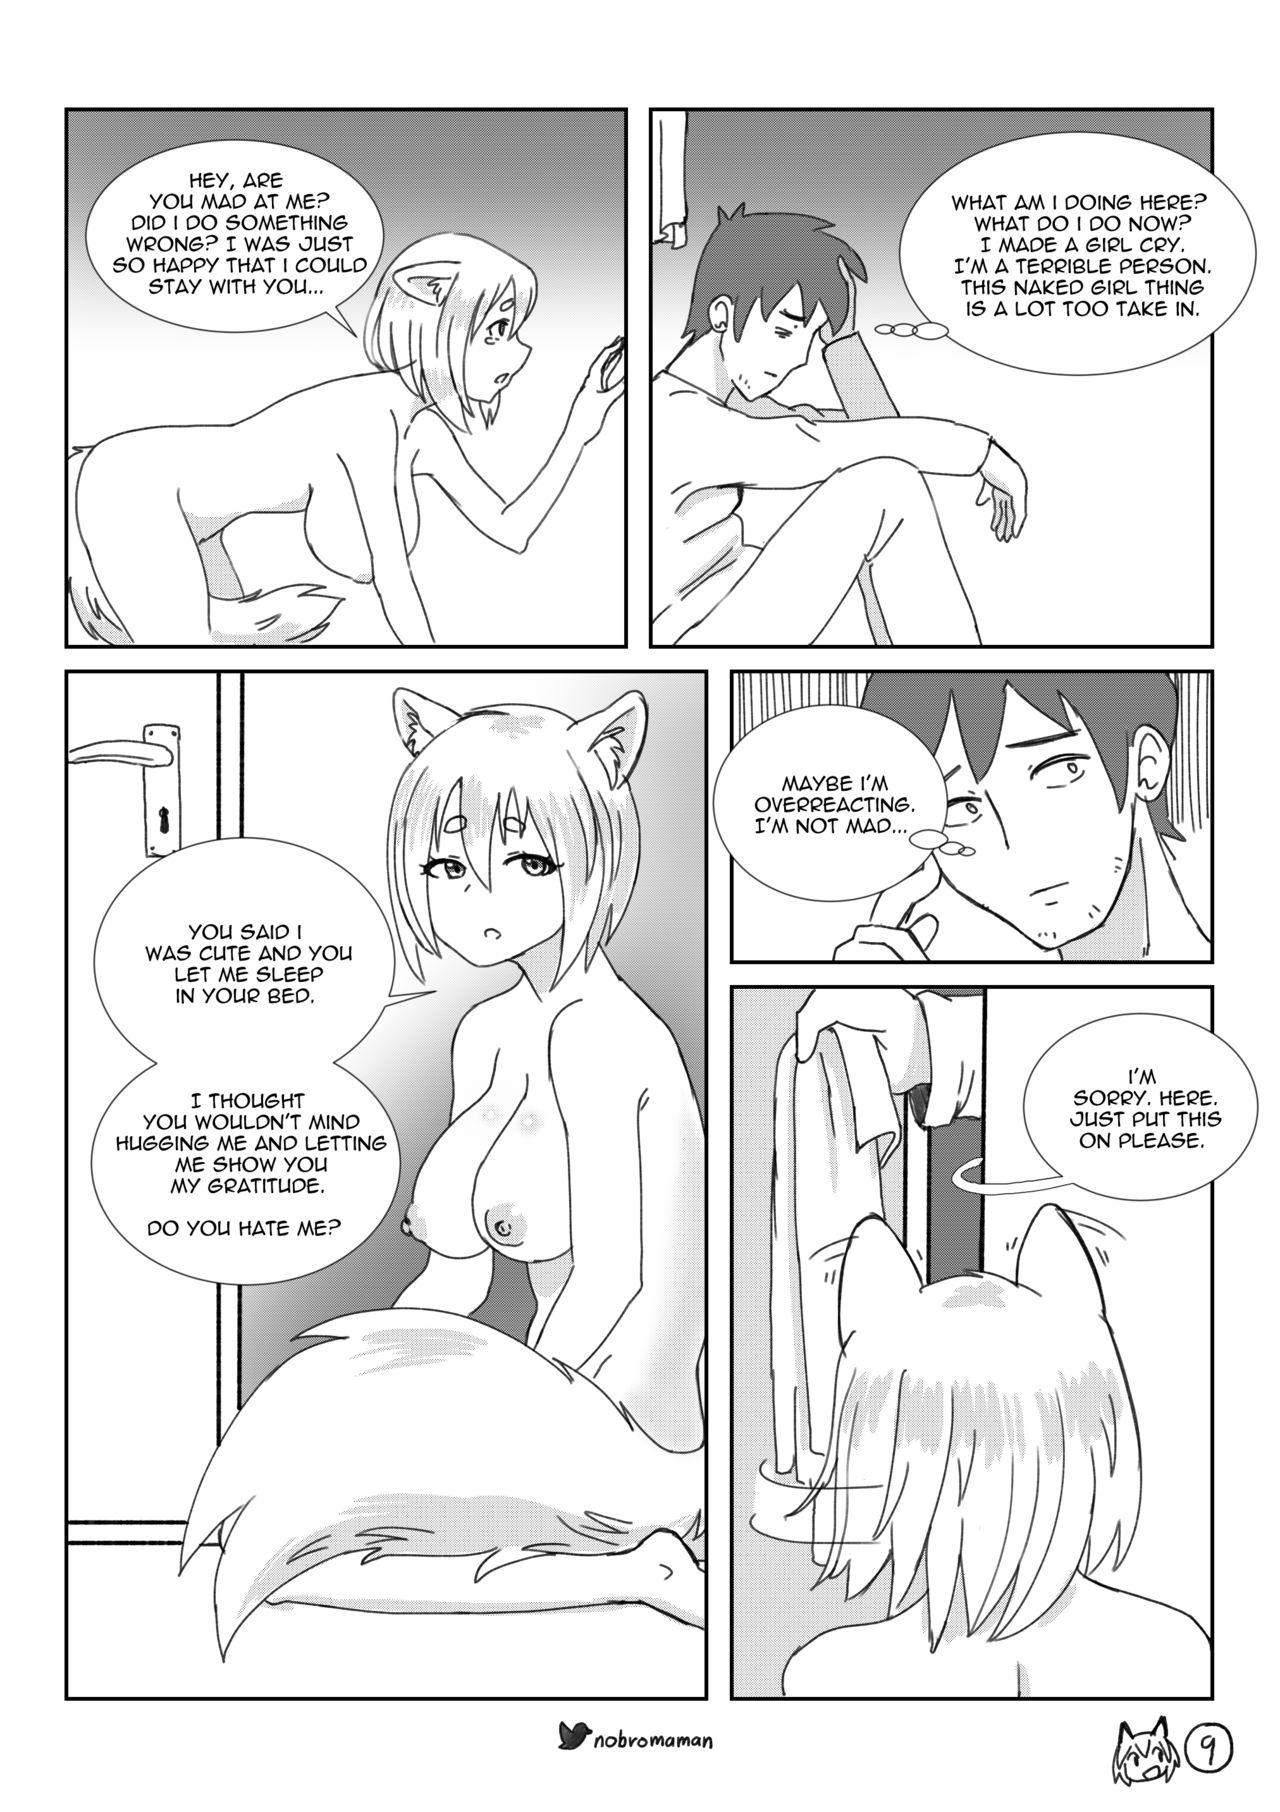 Life with a dog girl - Chapter1 9